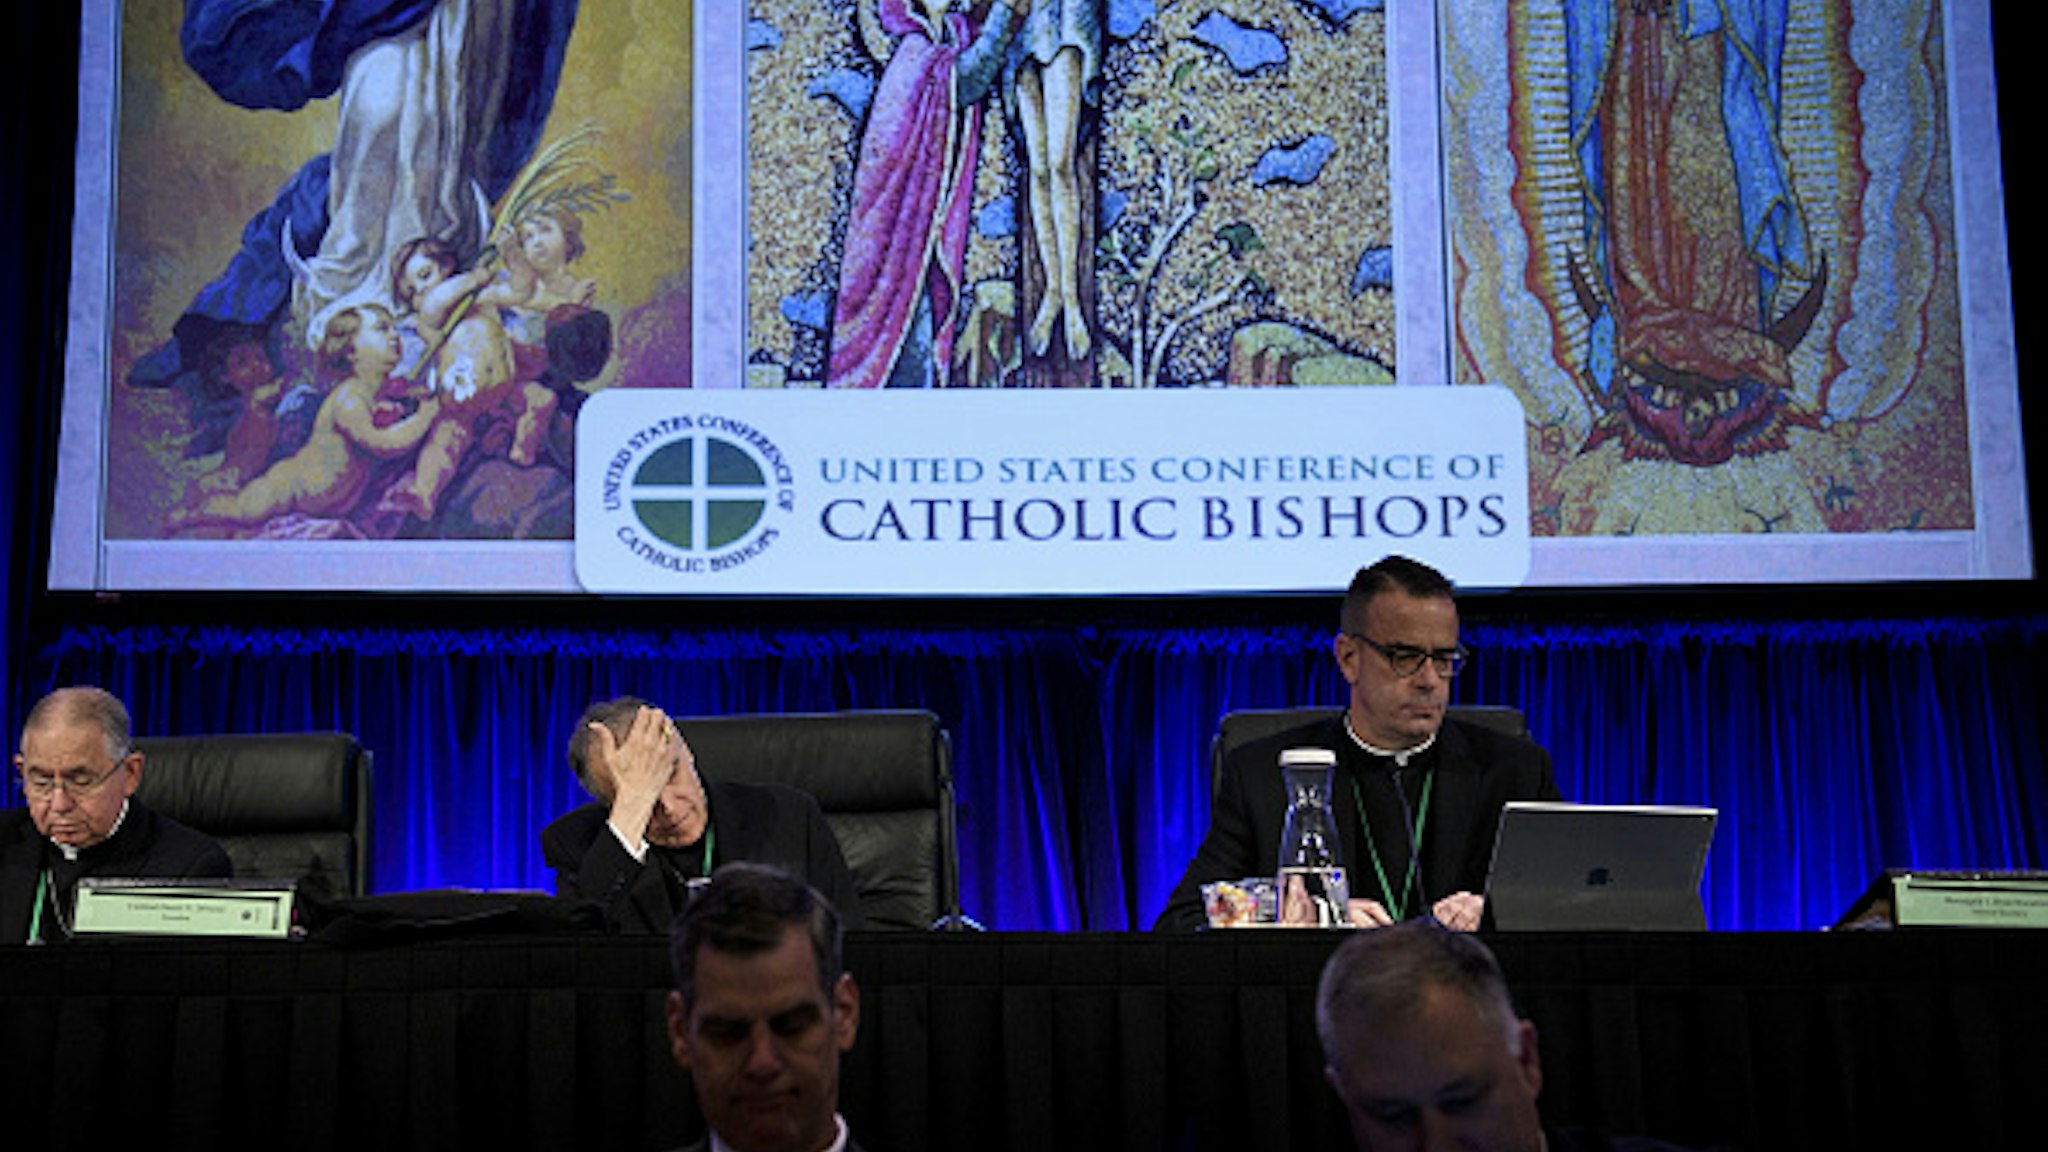 Reverend Jose Gomez (Top L), Archbishop of Los Angeles and Vice President of the USCCB General Assembly, Cardinal Daniel DiNardo (Top C), President of the USCCB General Assembly, Reverend Monsignor J. Brian Bransfield (Top R), General Secretary of the USCCB General Assembly, and others wait for an opening session during the annual US Conference of Catholic Bishops November 12, 2018 in Baltimore, Maryland.